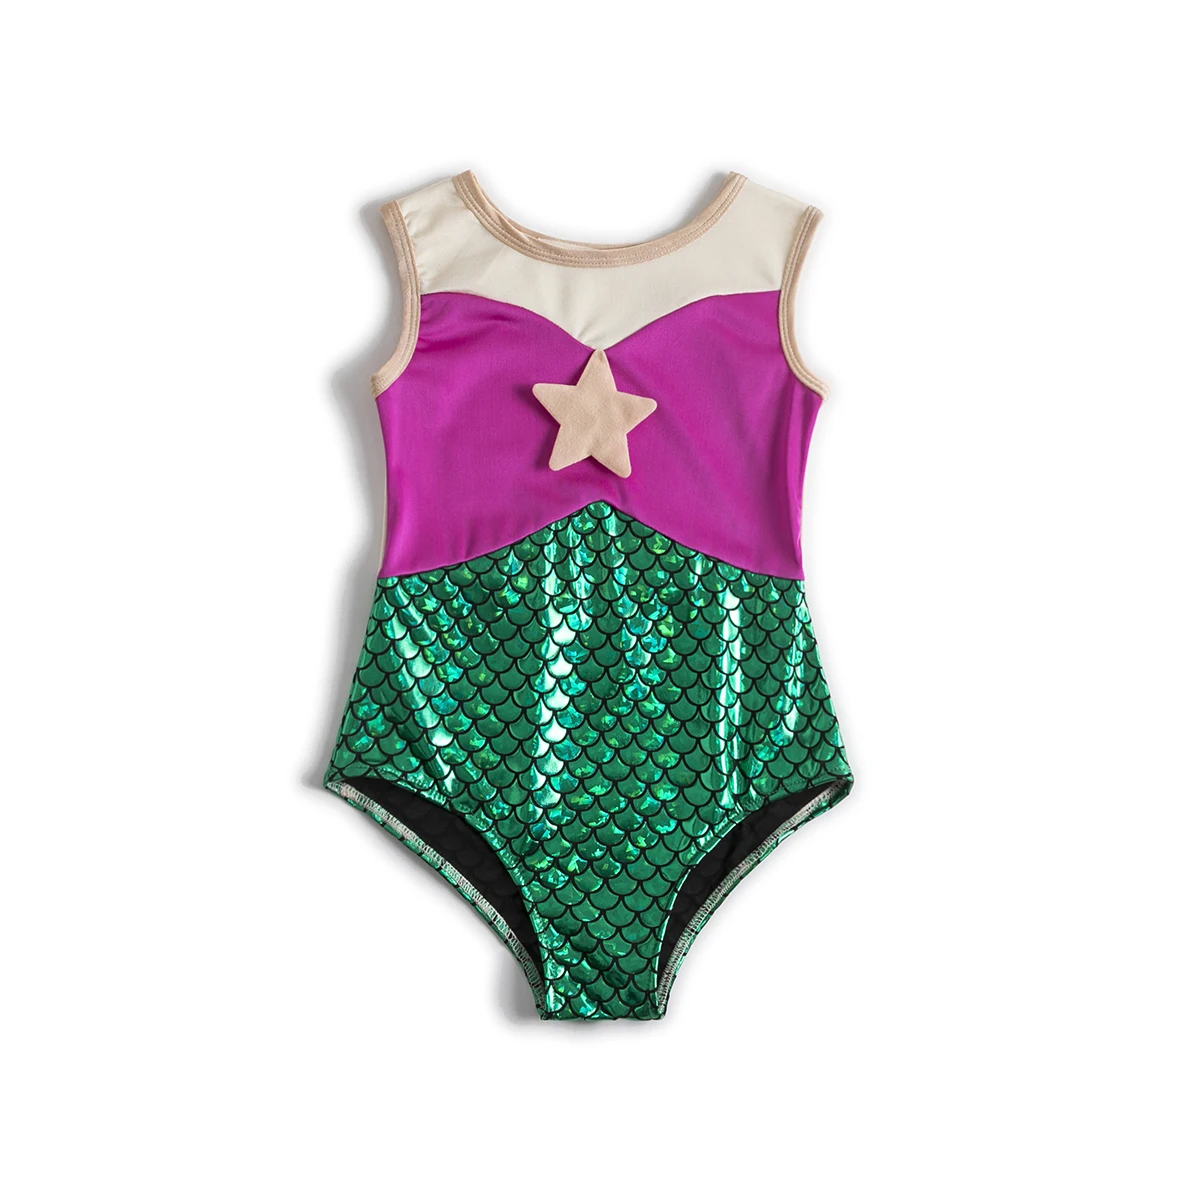 New Kids Mermaid Set Girl Princess Dress Cosplay Costume Swimsuit Princess Pocahont Swimwear Children Costume For Girls Swimsuit aunt and niece matching outfits